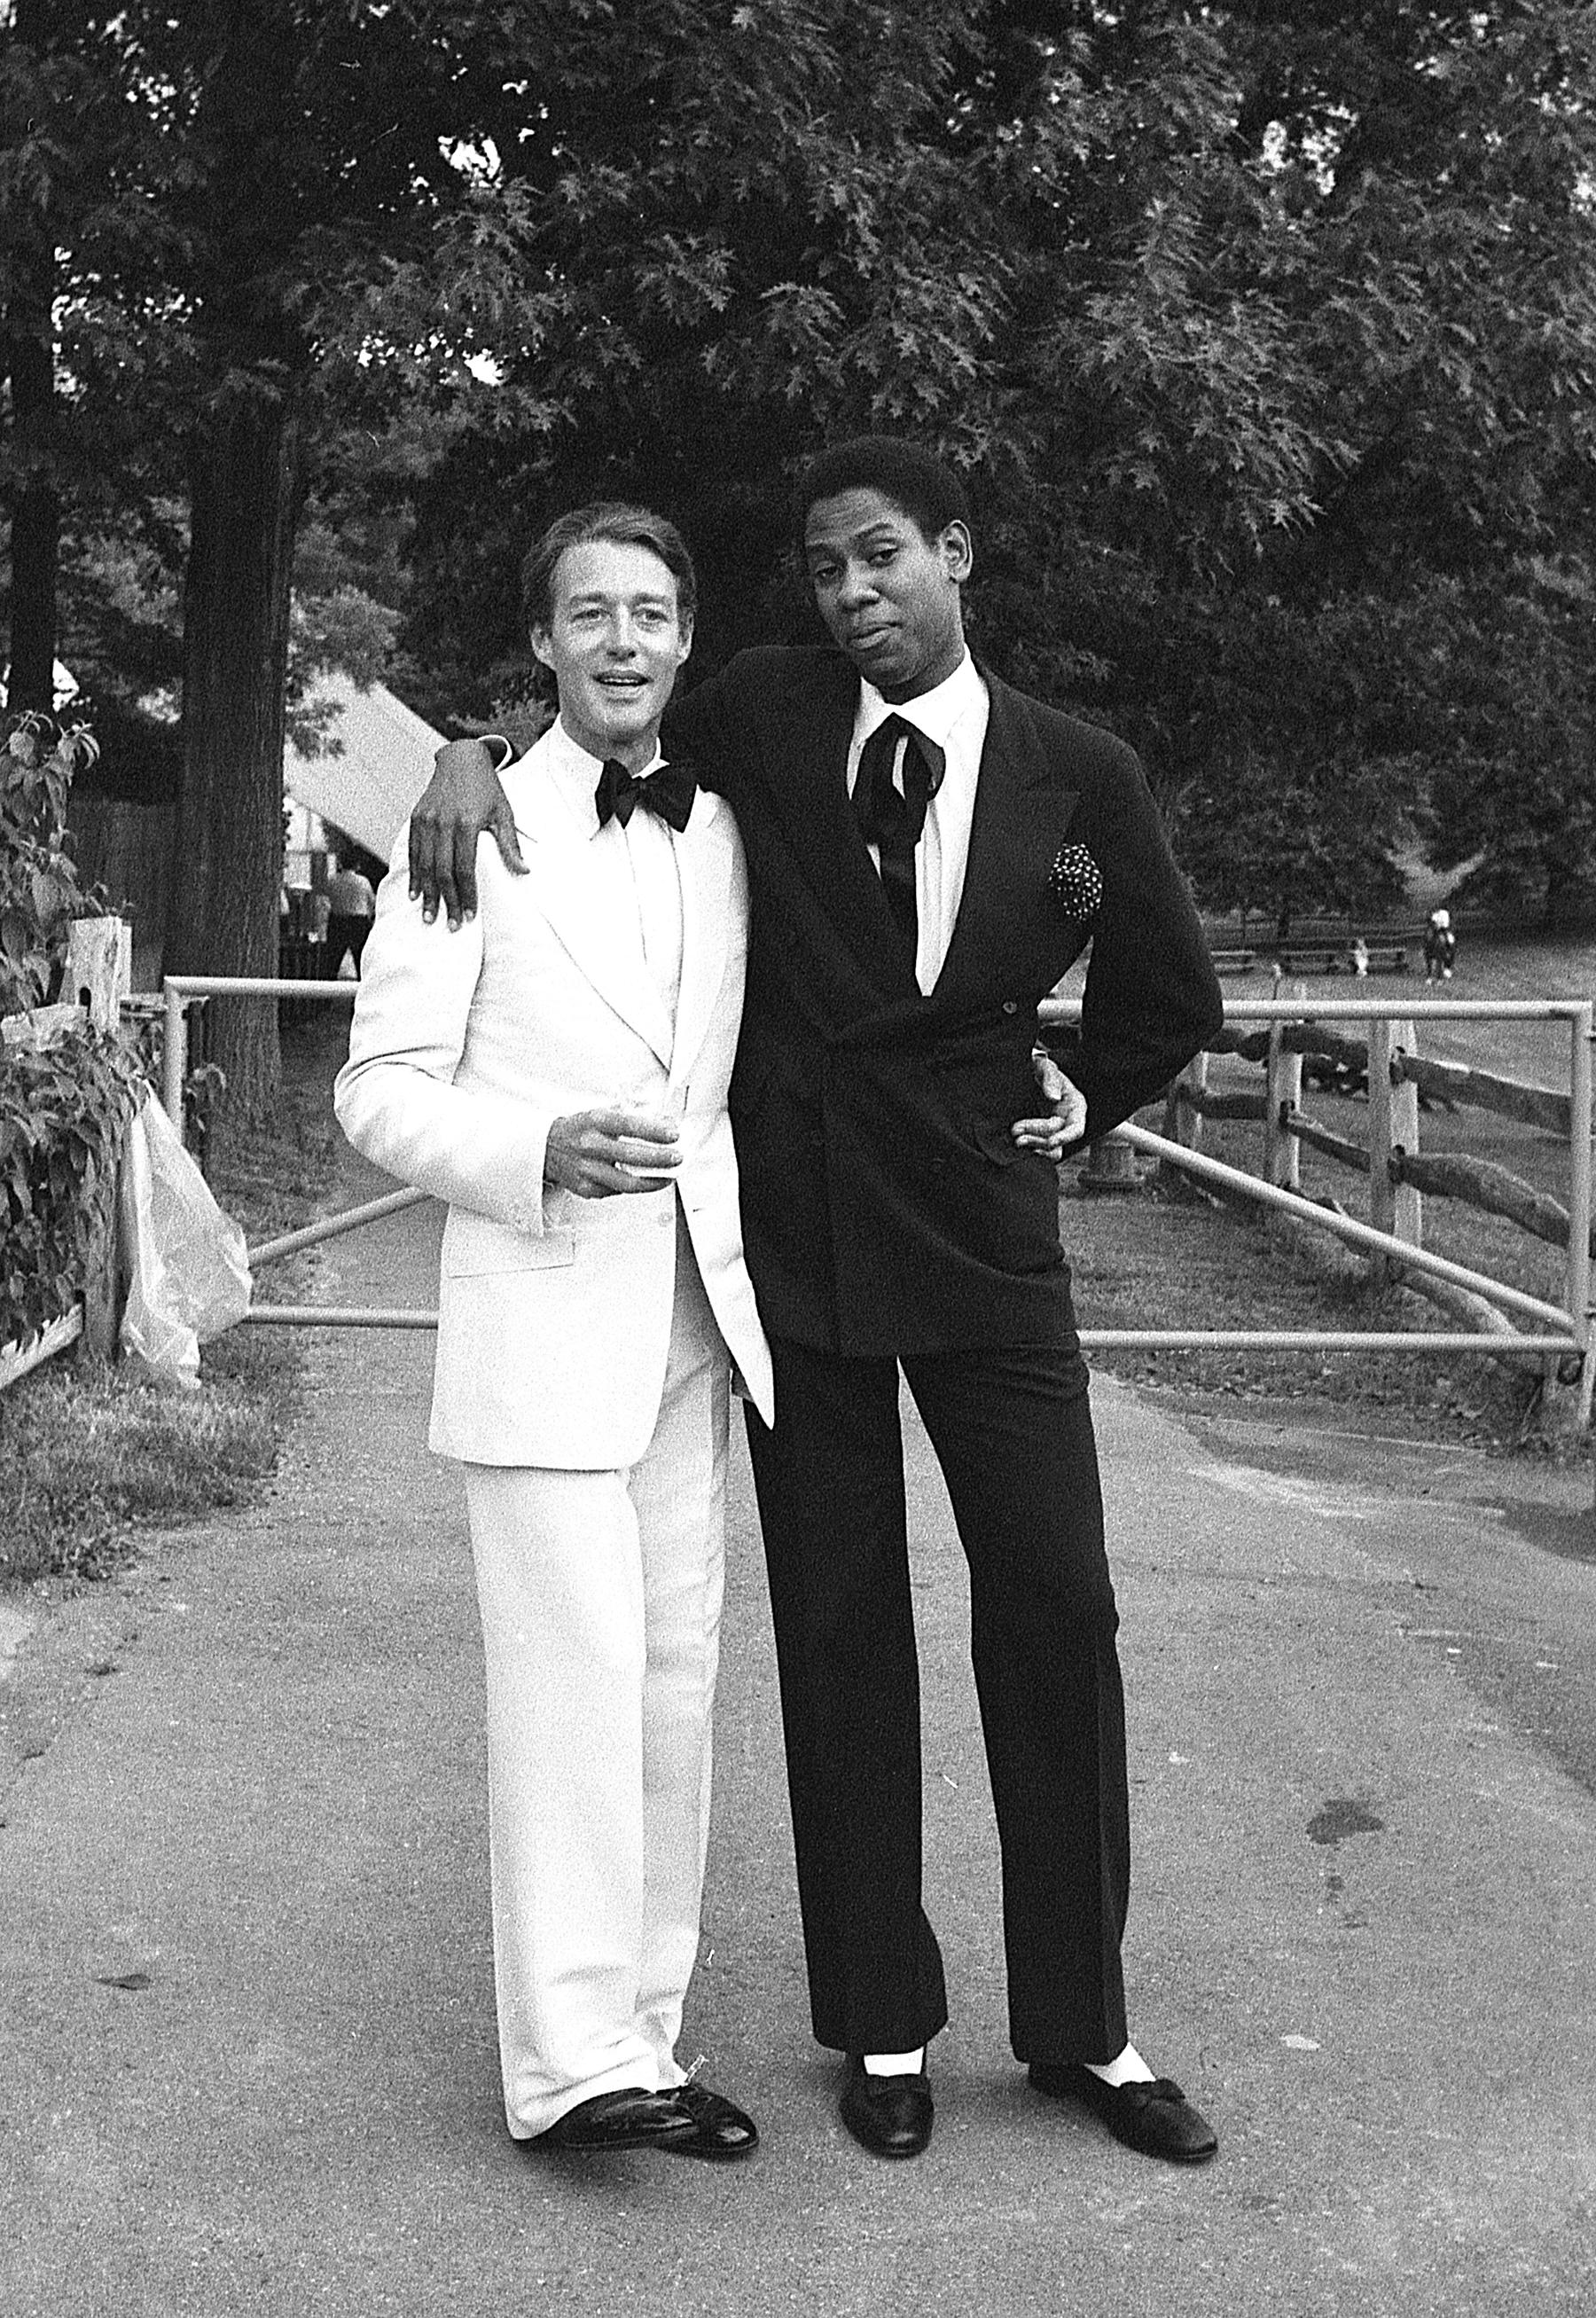 Halston and André Leon Talley, Tanglewood, Massachusetts - Photograph by Harry Benson